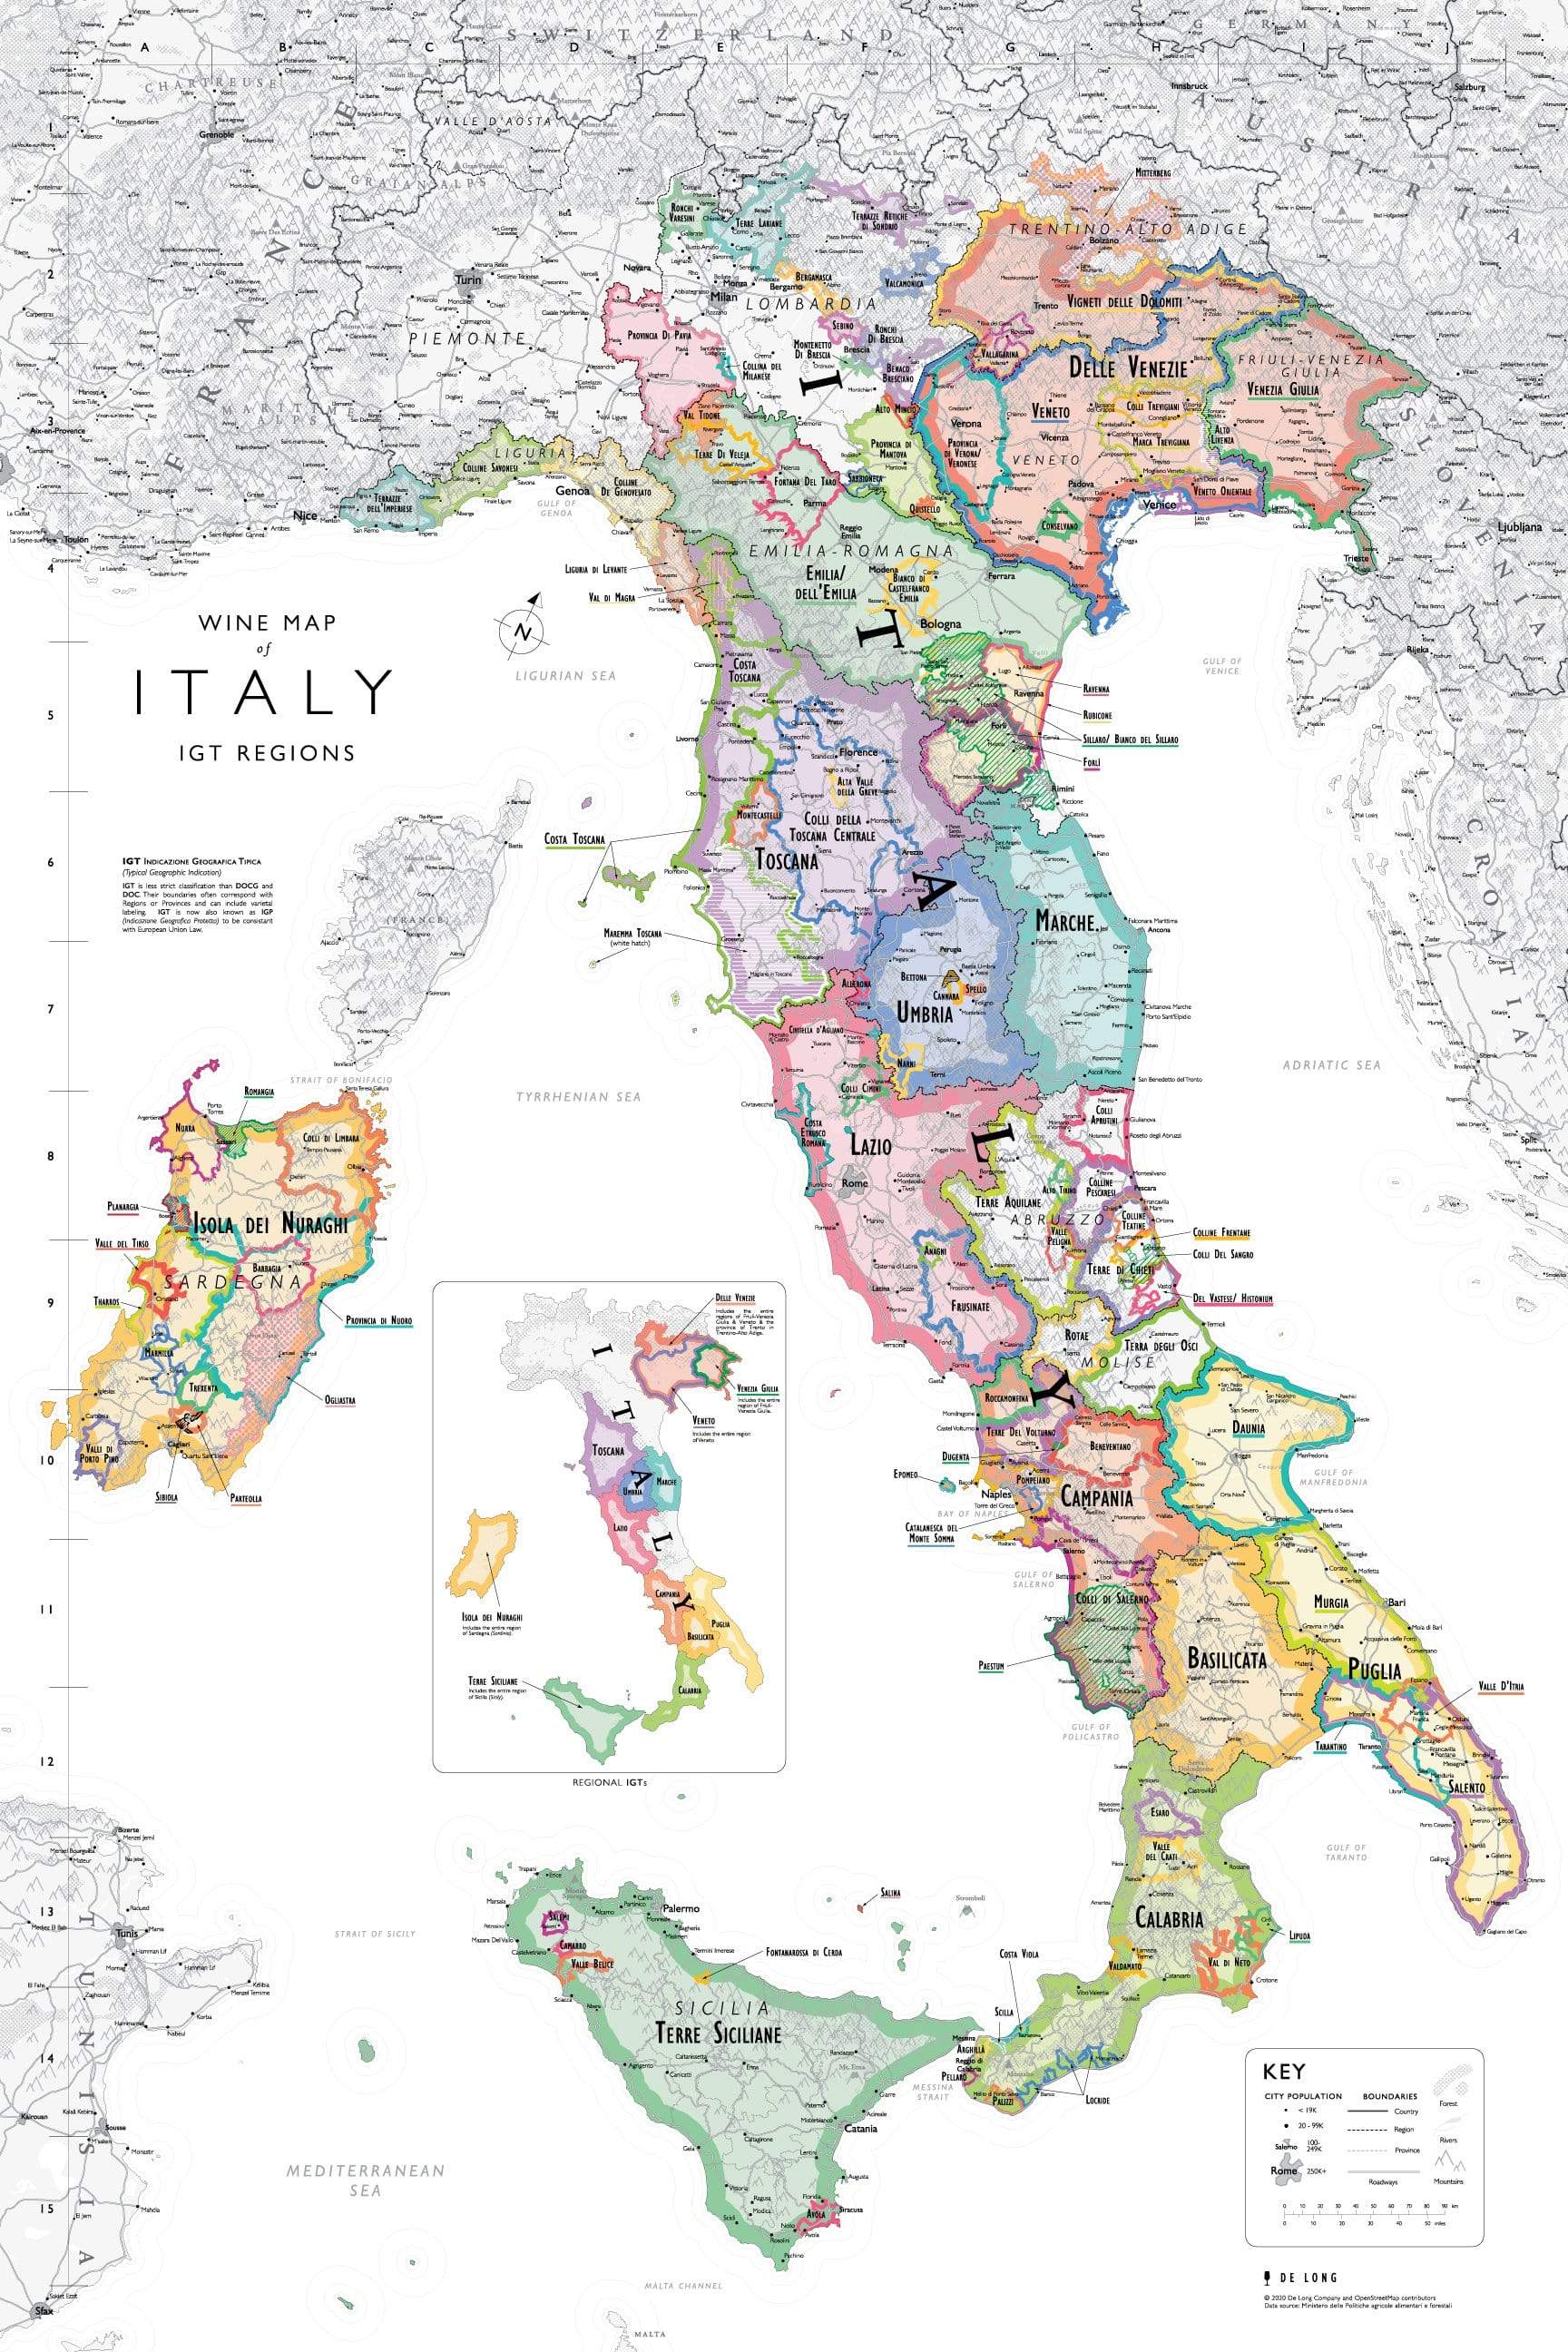 Wine Map of Italy - Bookshelf Edition IGT Regions Map